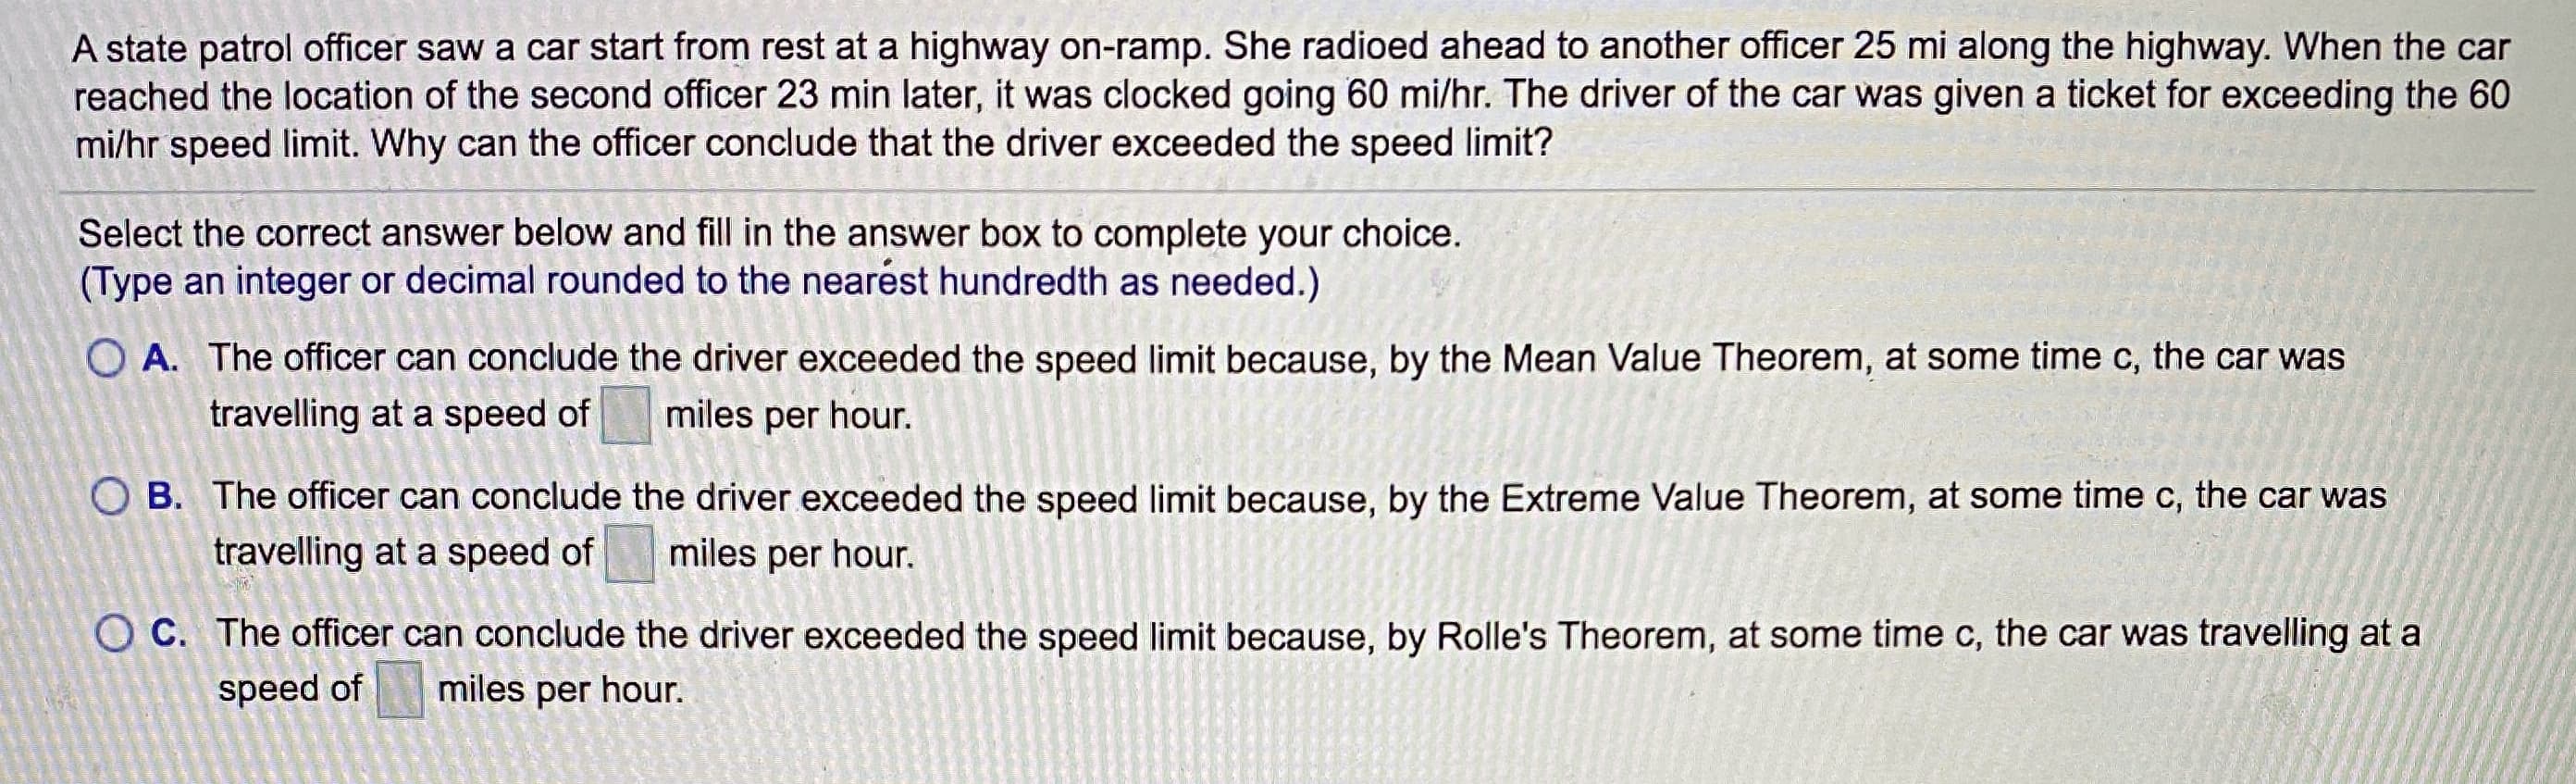 A state patrol officer saw a car start from rest at a highway on-ramp. She radioed ahead to another officer 25 mi along the highway. When the car
reached the location of the second officer 23 min later, it was clocked going 60 mi/hr. The driver of the car was given a ticket for exceeding the 60
mi/hr speed limit. Why can the officer conclude that the driver exceeded the speed limit?
Select the correct answer below and fill in the answer box to complete your choice.
(Type an integer or decimal rounded to the nearest hundredth as needed.)
O A. The officer can conclude the driver exceeded the speed limit because, by the Mean Value Theorem, at some time c, the car was
travelling at a speed of
miles per hour.
O B. The officer can conclude the driver exceeded the speed limit because, by the Extreme Value Theorem, at some time c, the car was
travelling at a speed of
miles per hour.
O C. The officer can conclude the driver exceeded the speed limit because, by Rolle's Theorem, at some time c, the car was travelling at a
speed of miles per hour.
